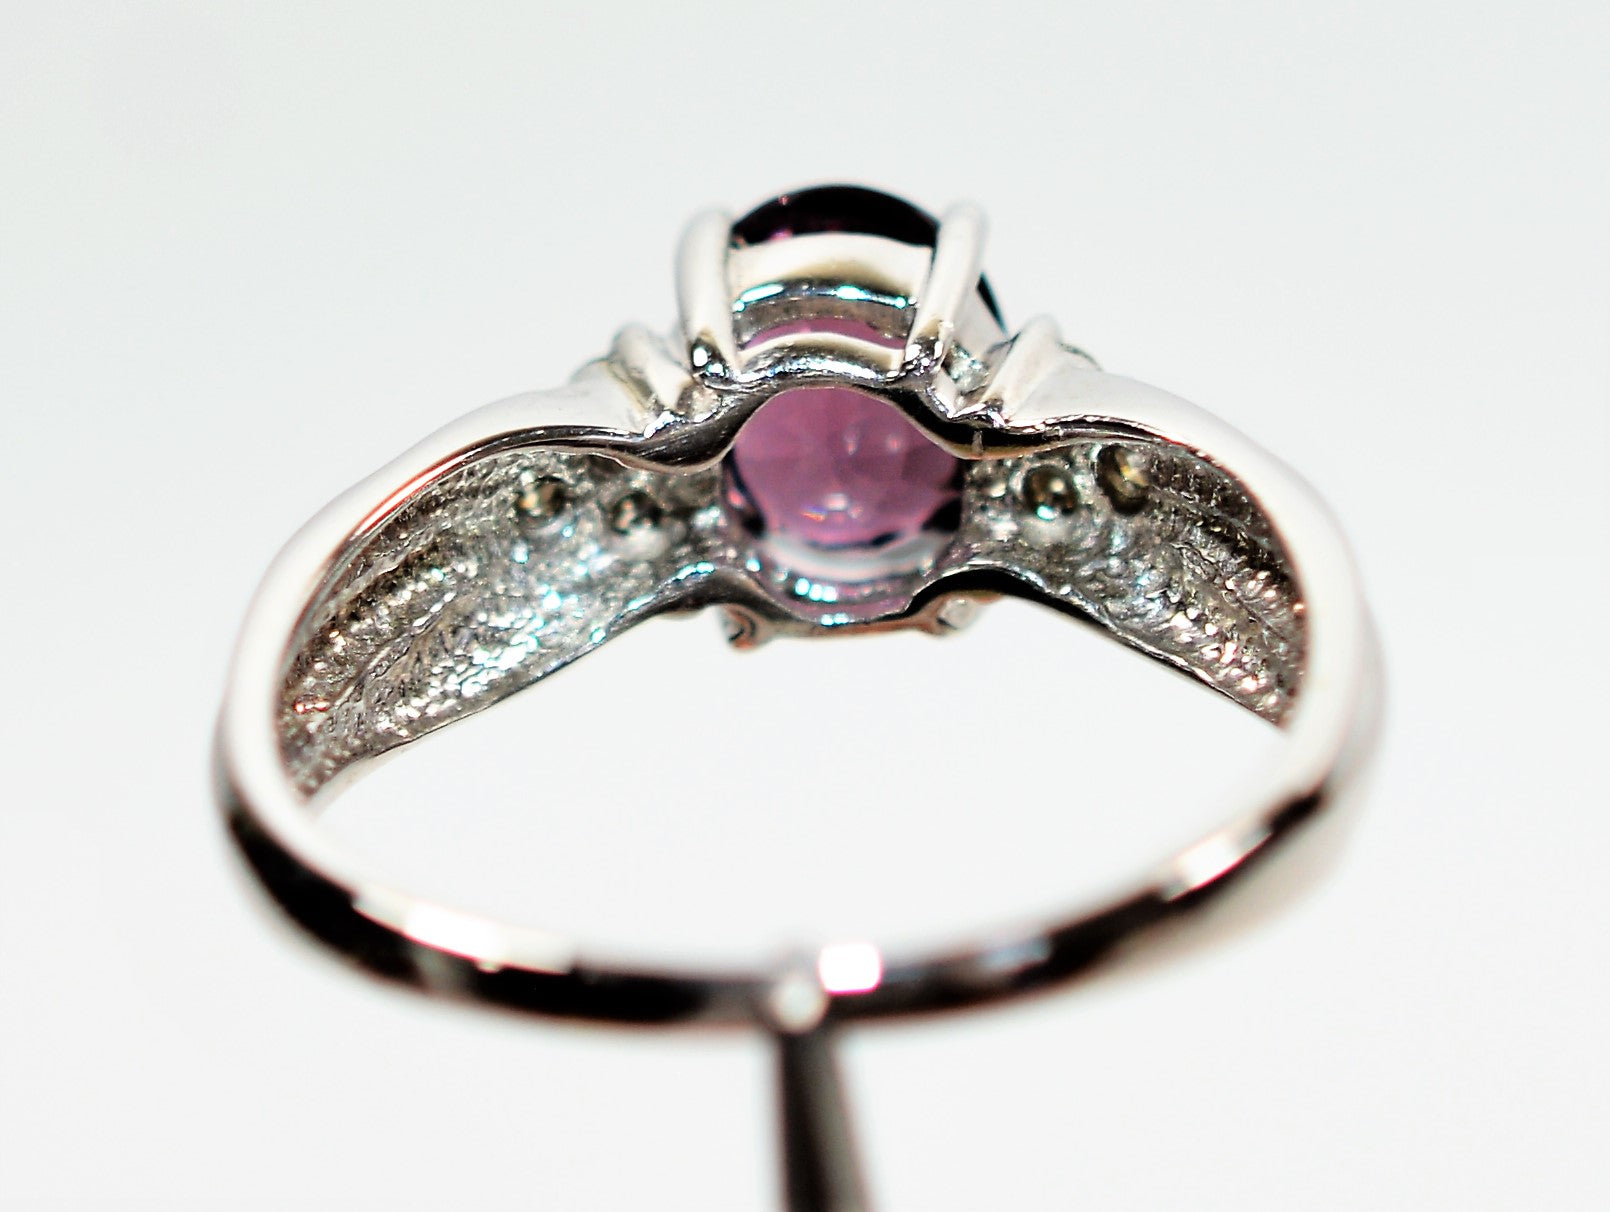 Natural Spinel & Diamond Ring 14K Solid White Gold 1.62tcw Gemstone Ring Cocktail Ring June Birthstone Ring Purple Ring Women's Fine Jewelry